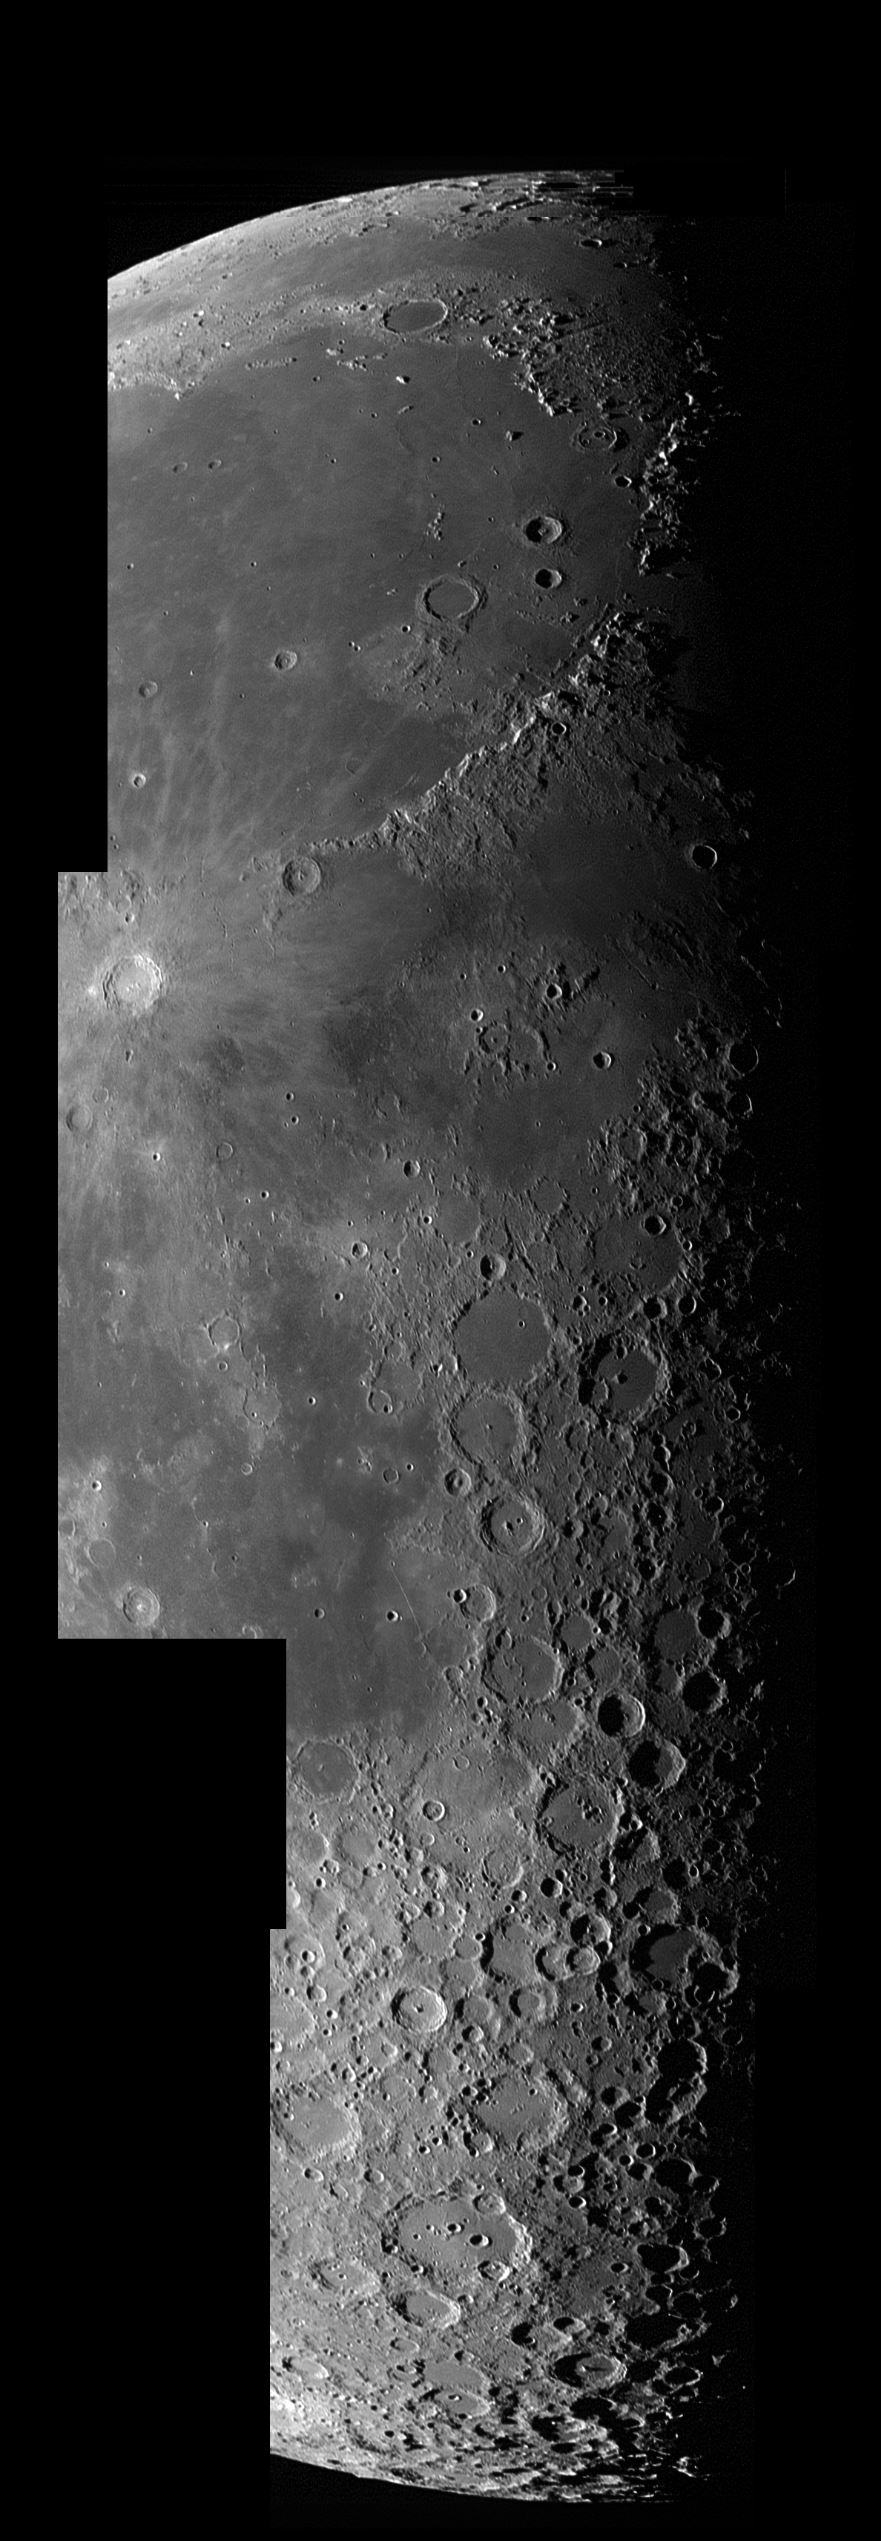 This is a mosaic of the terminator line on the Moon. Image Credit: NASA.